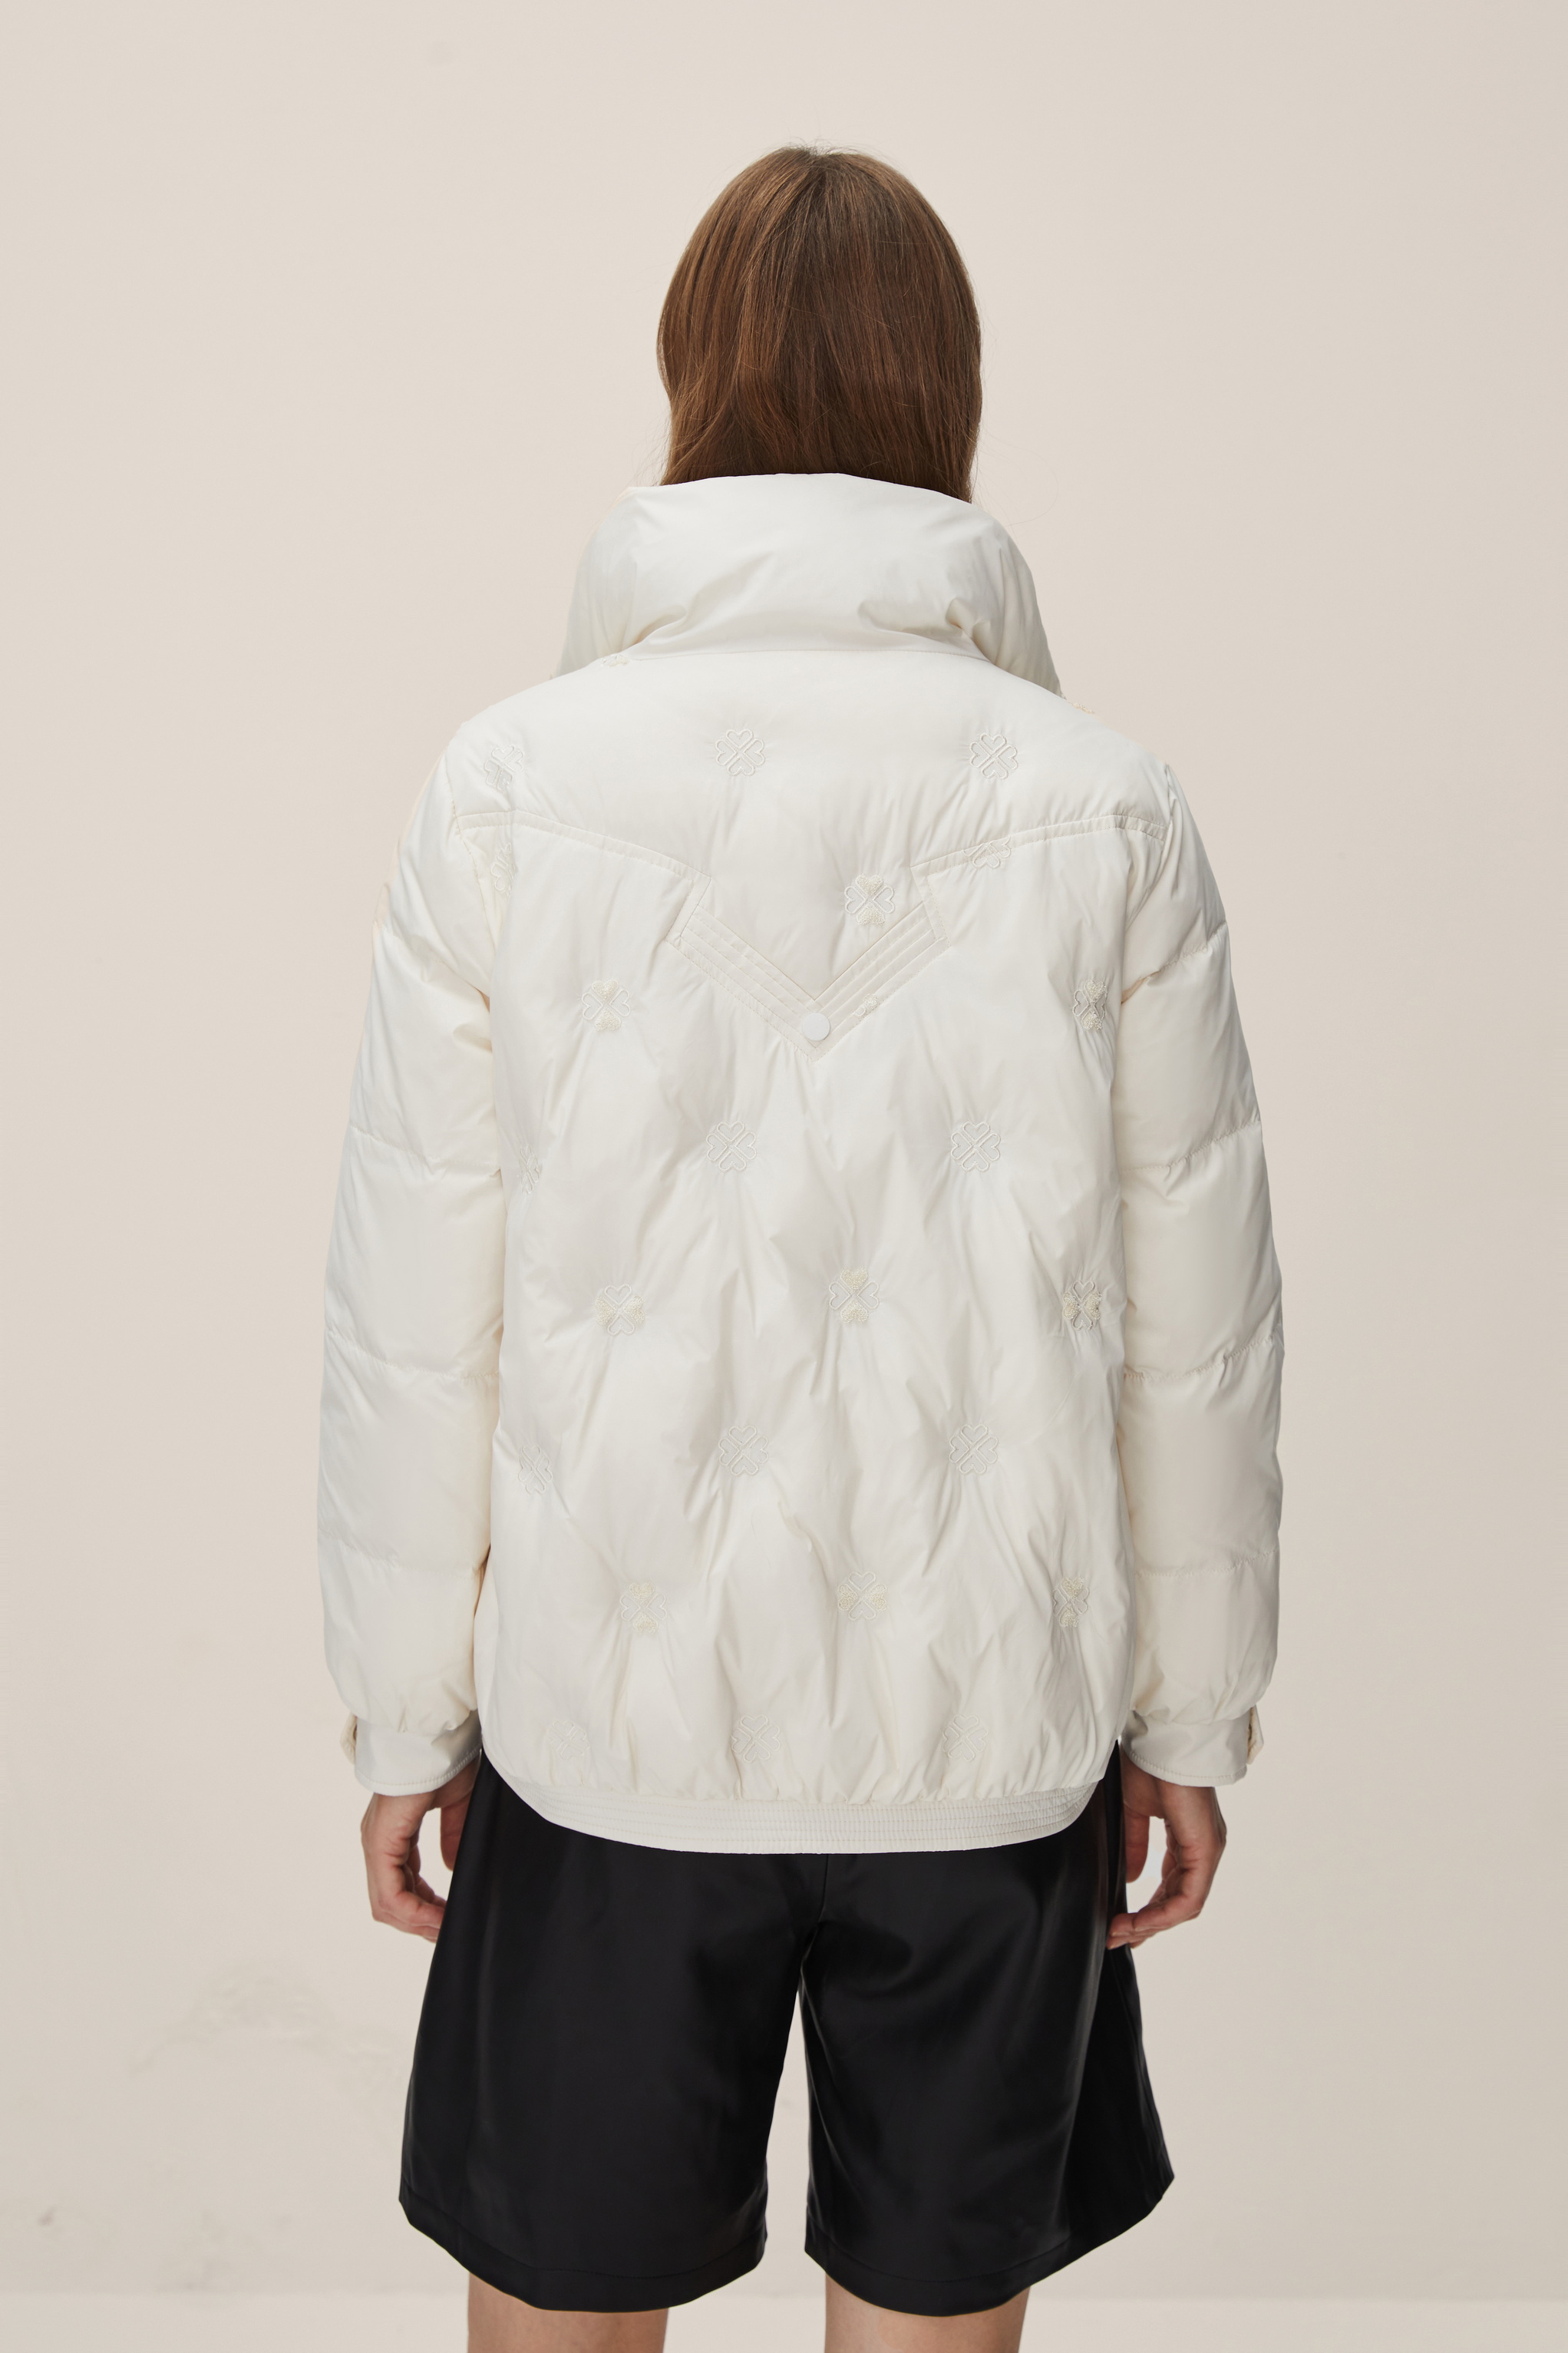 Leisure Standing Collar Down Jacket for Women